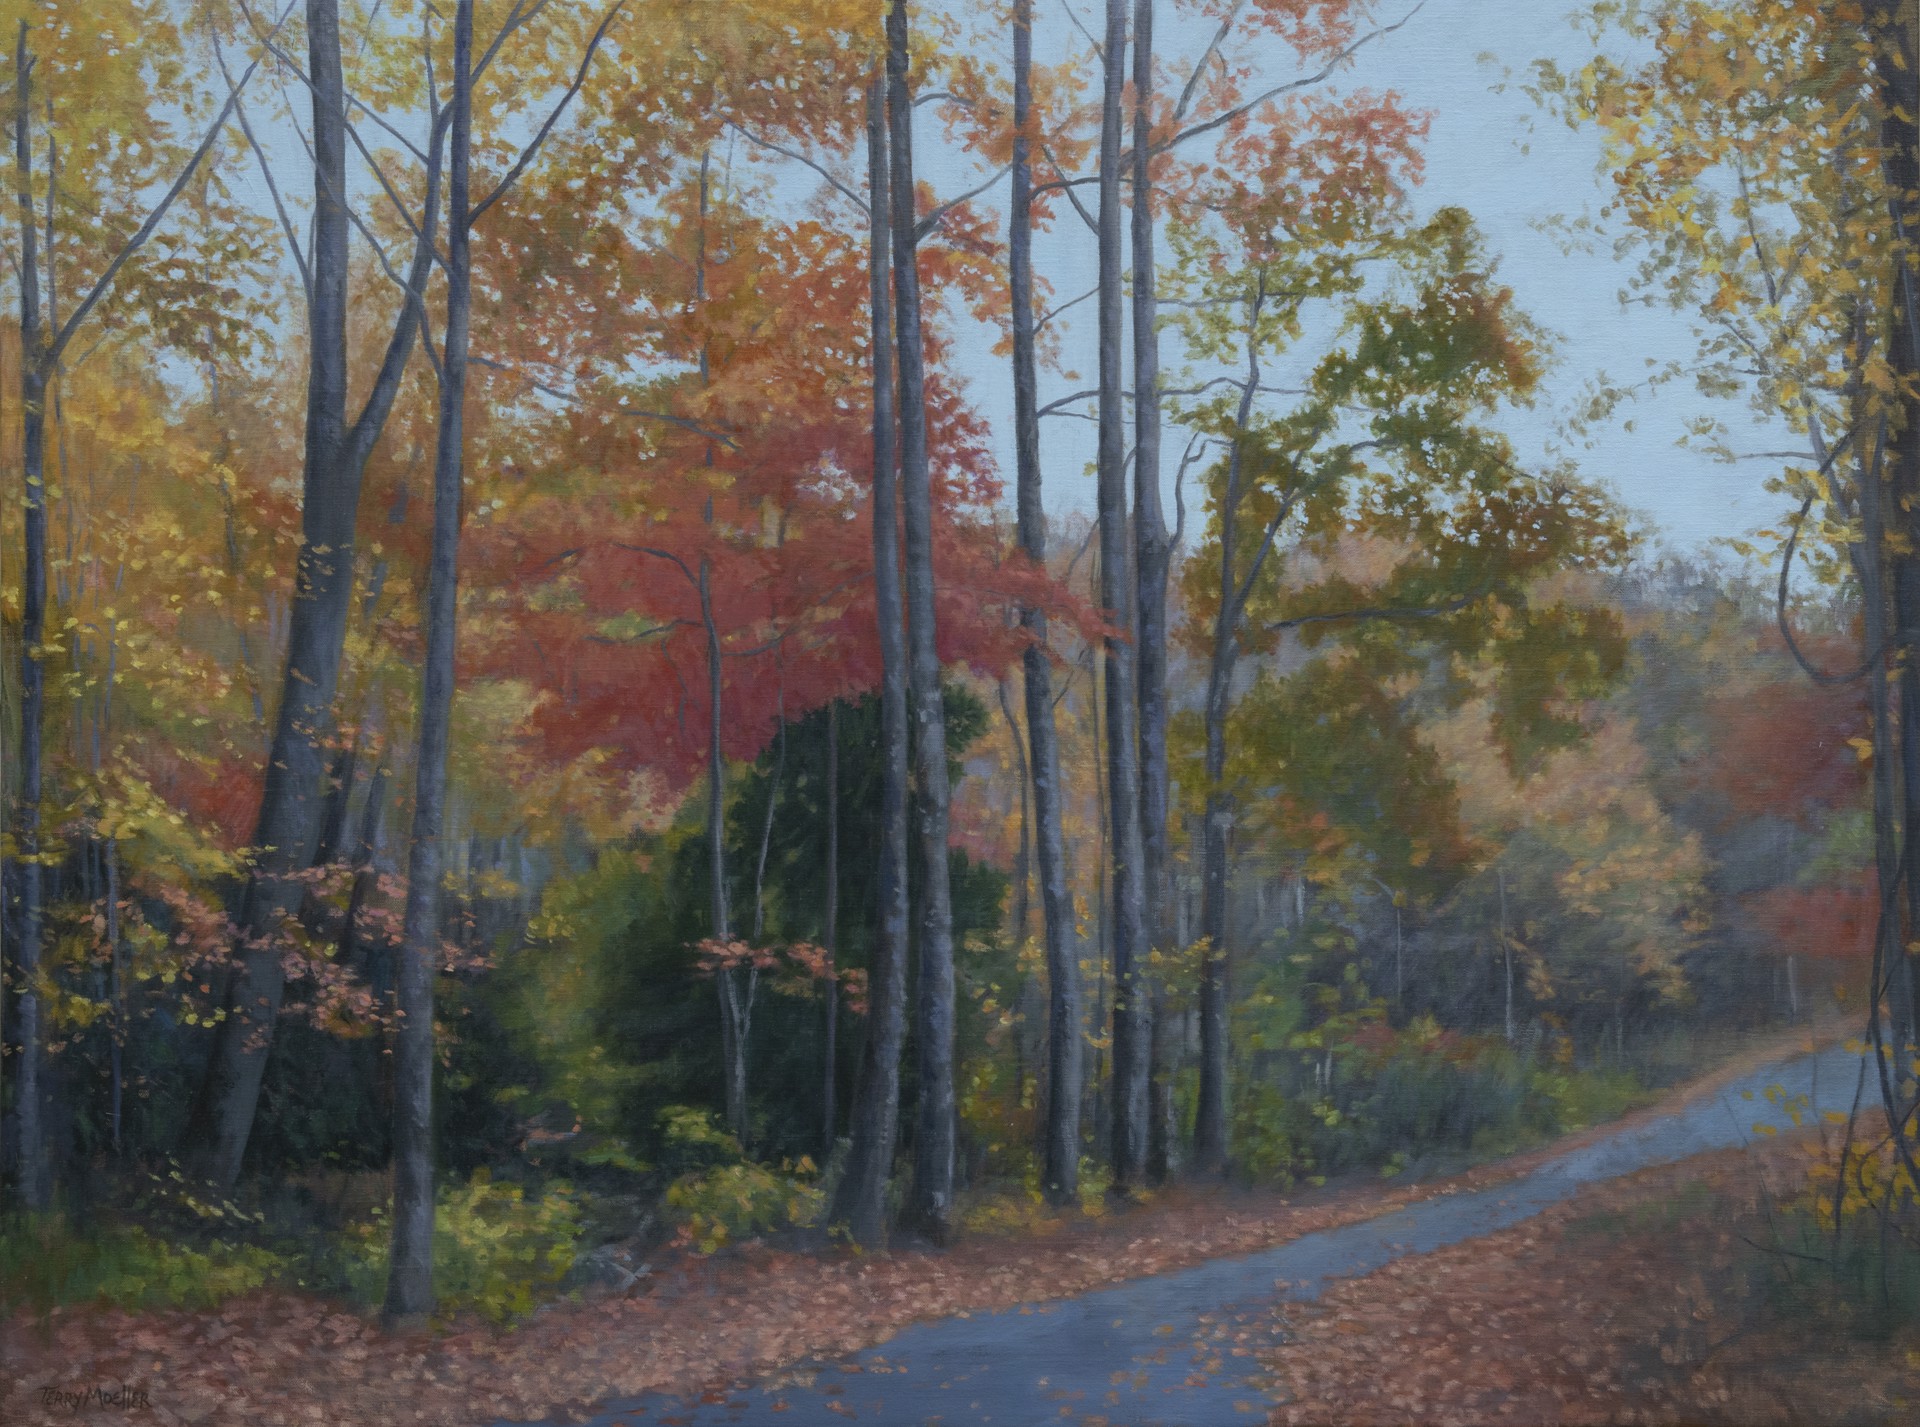 Country Road, South Carolina # 2 by Terry Moeller